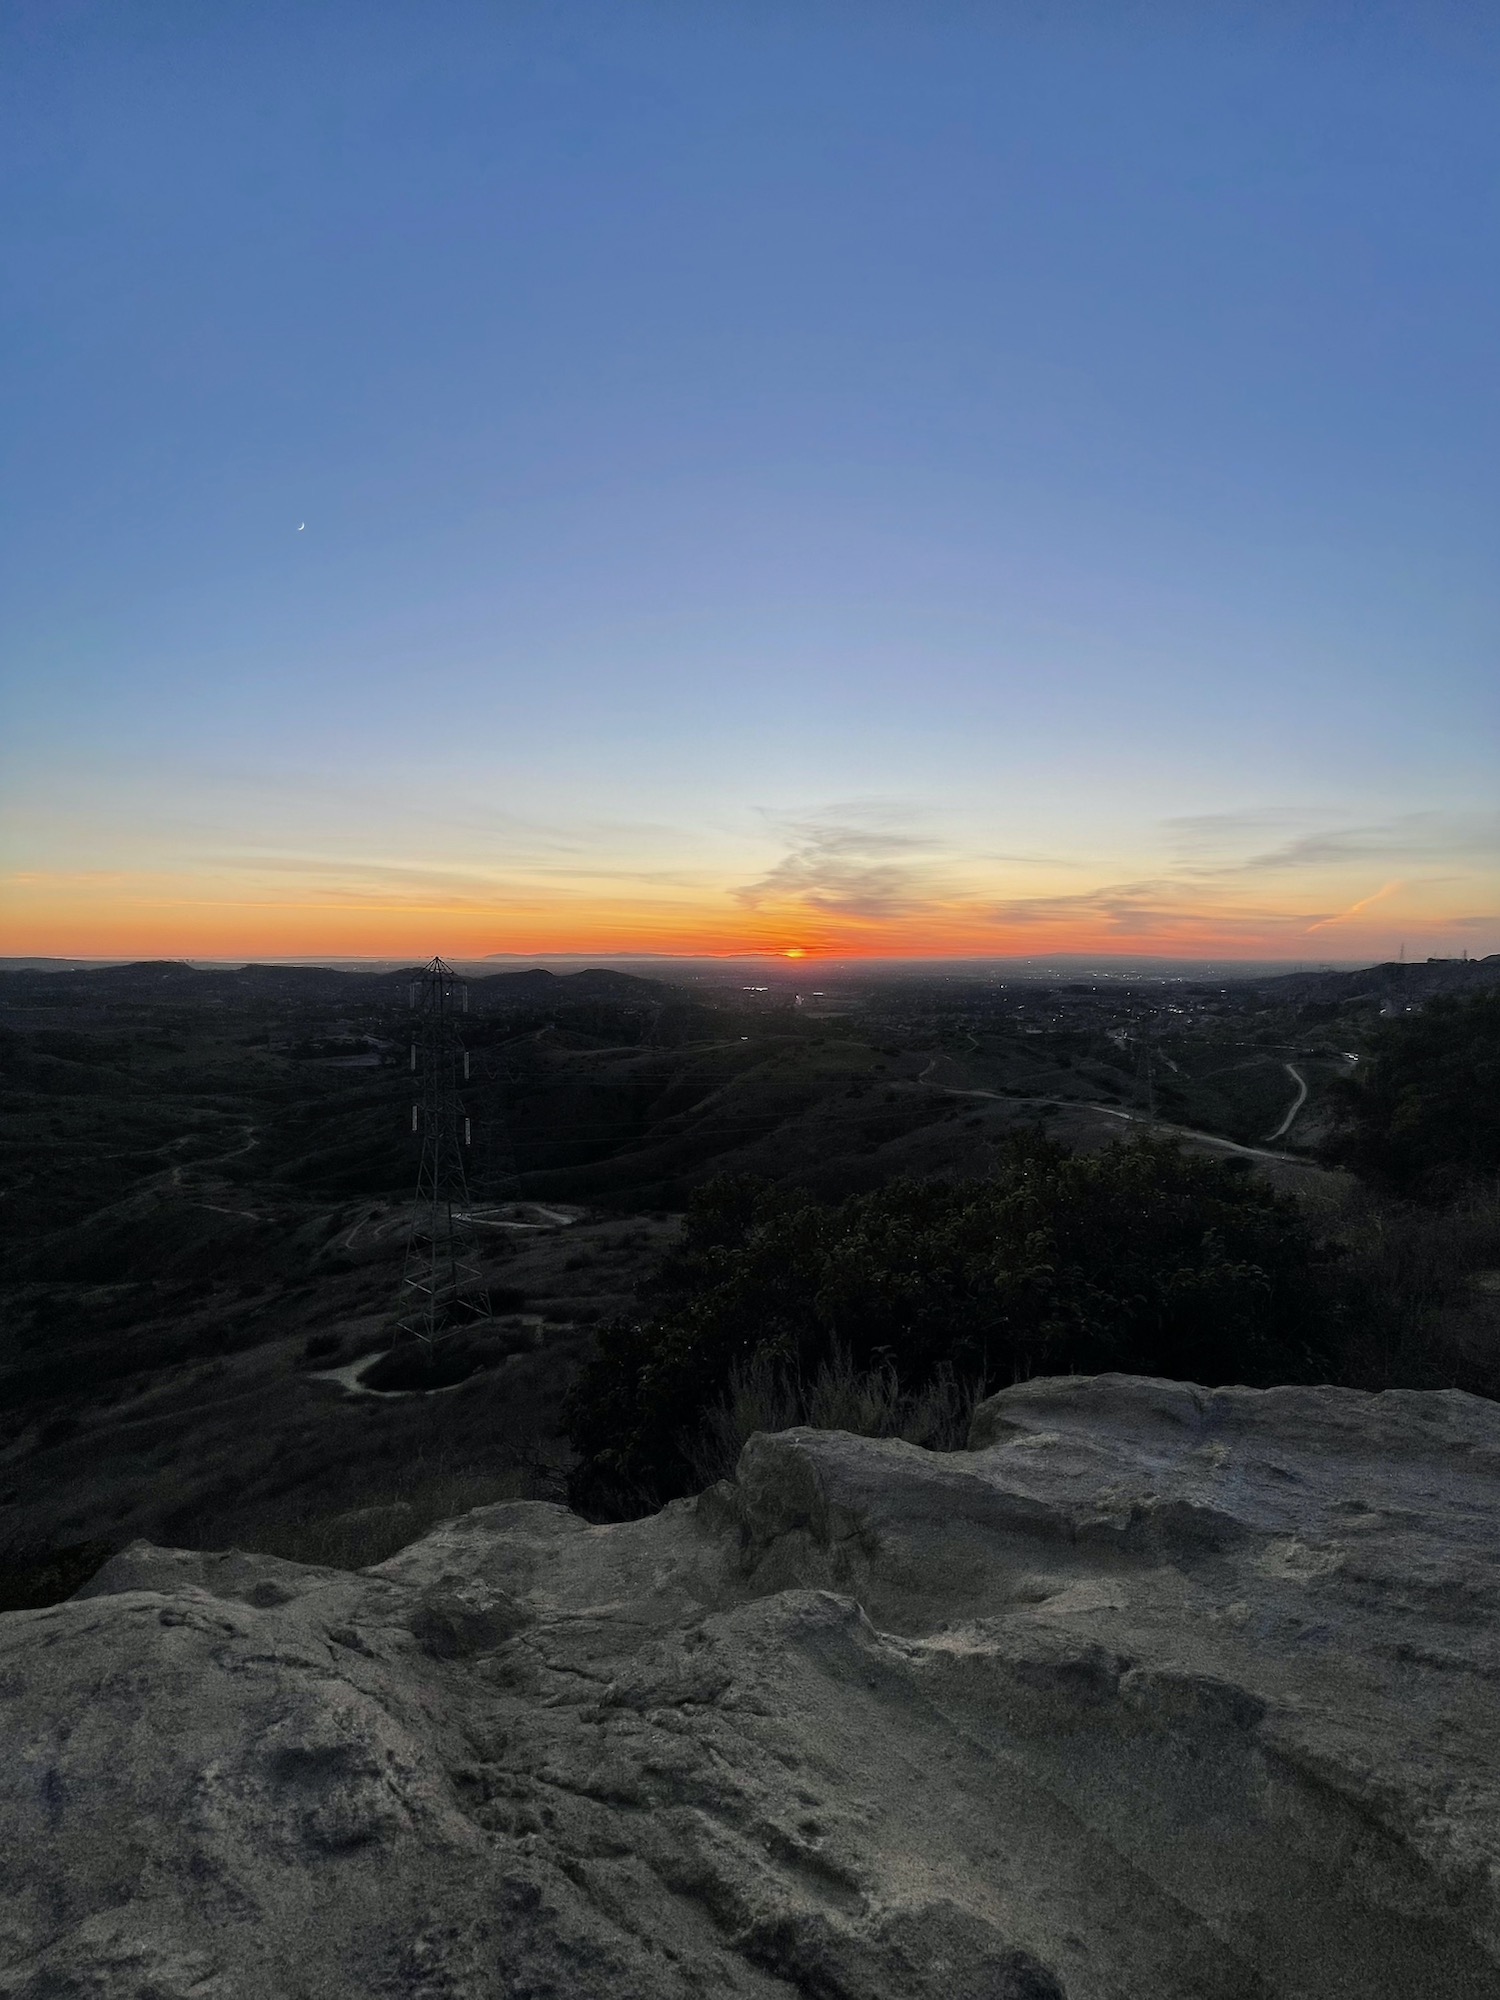 Sunset over pacific ocean - robbers roost vantage point - anaheim hills -23